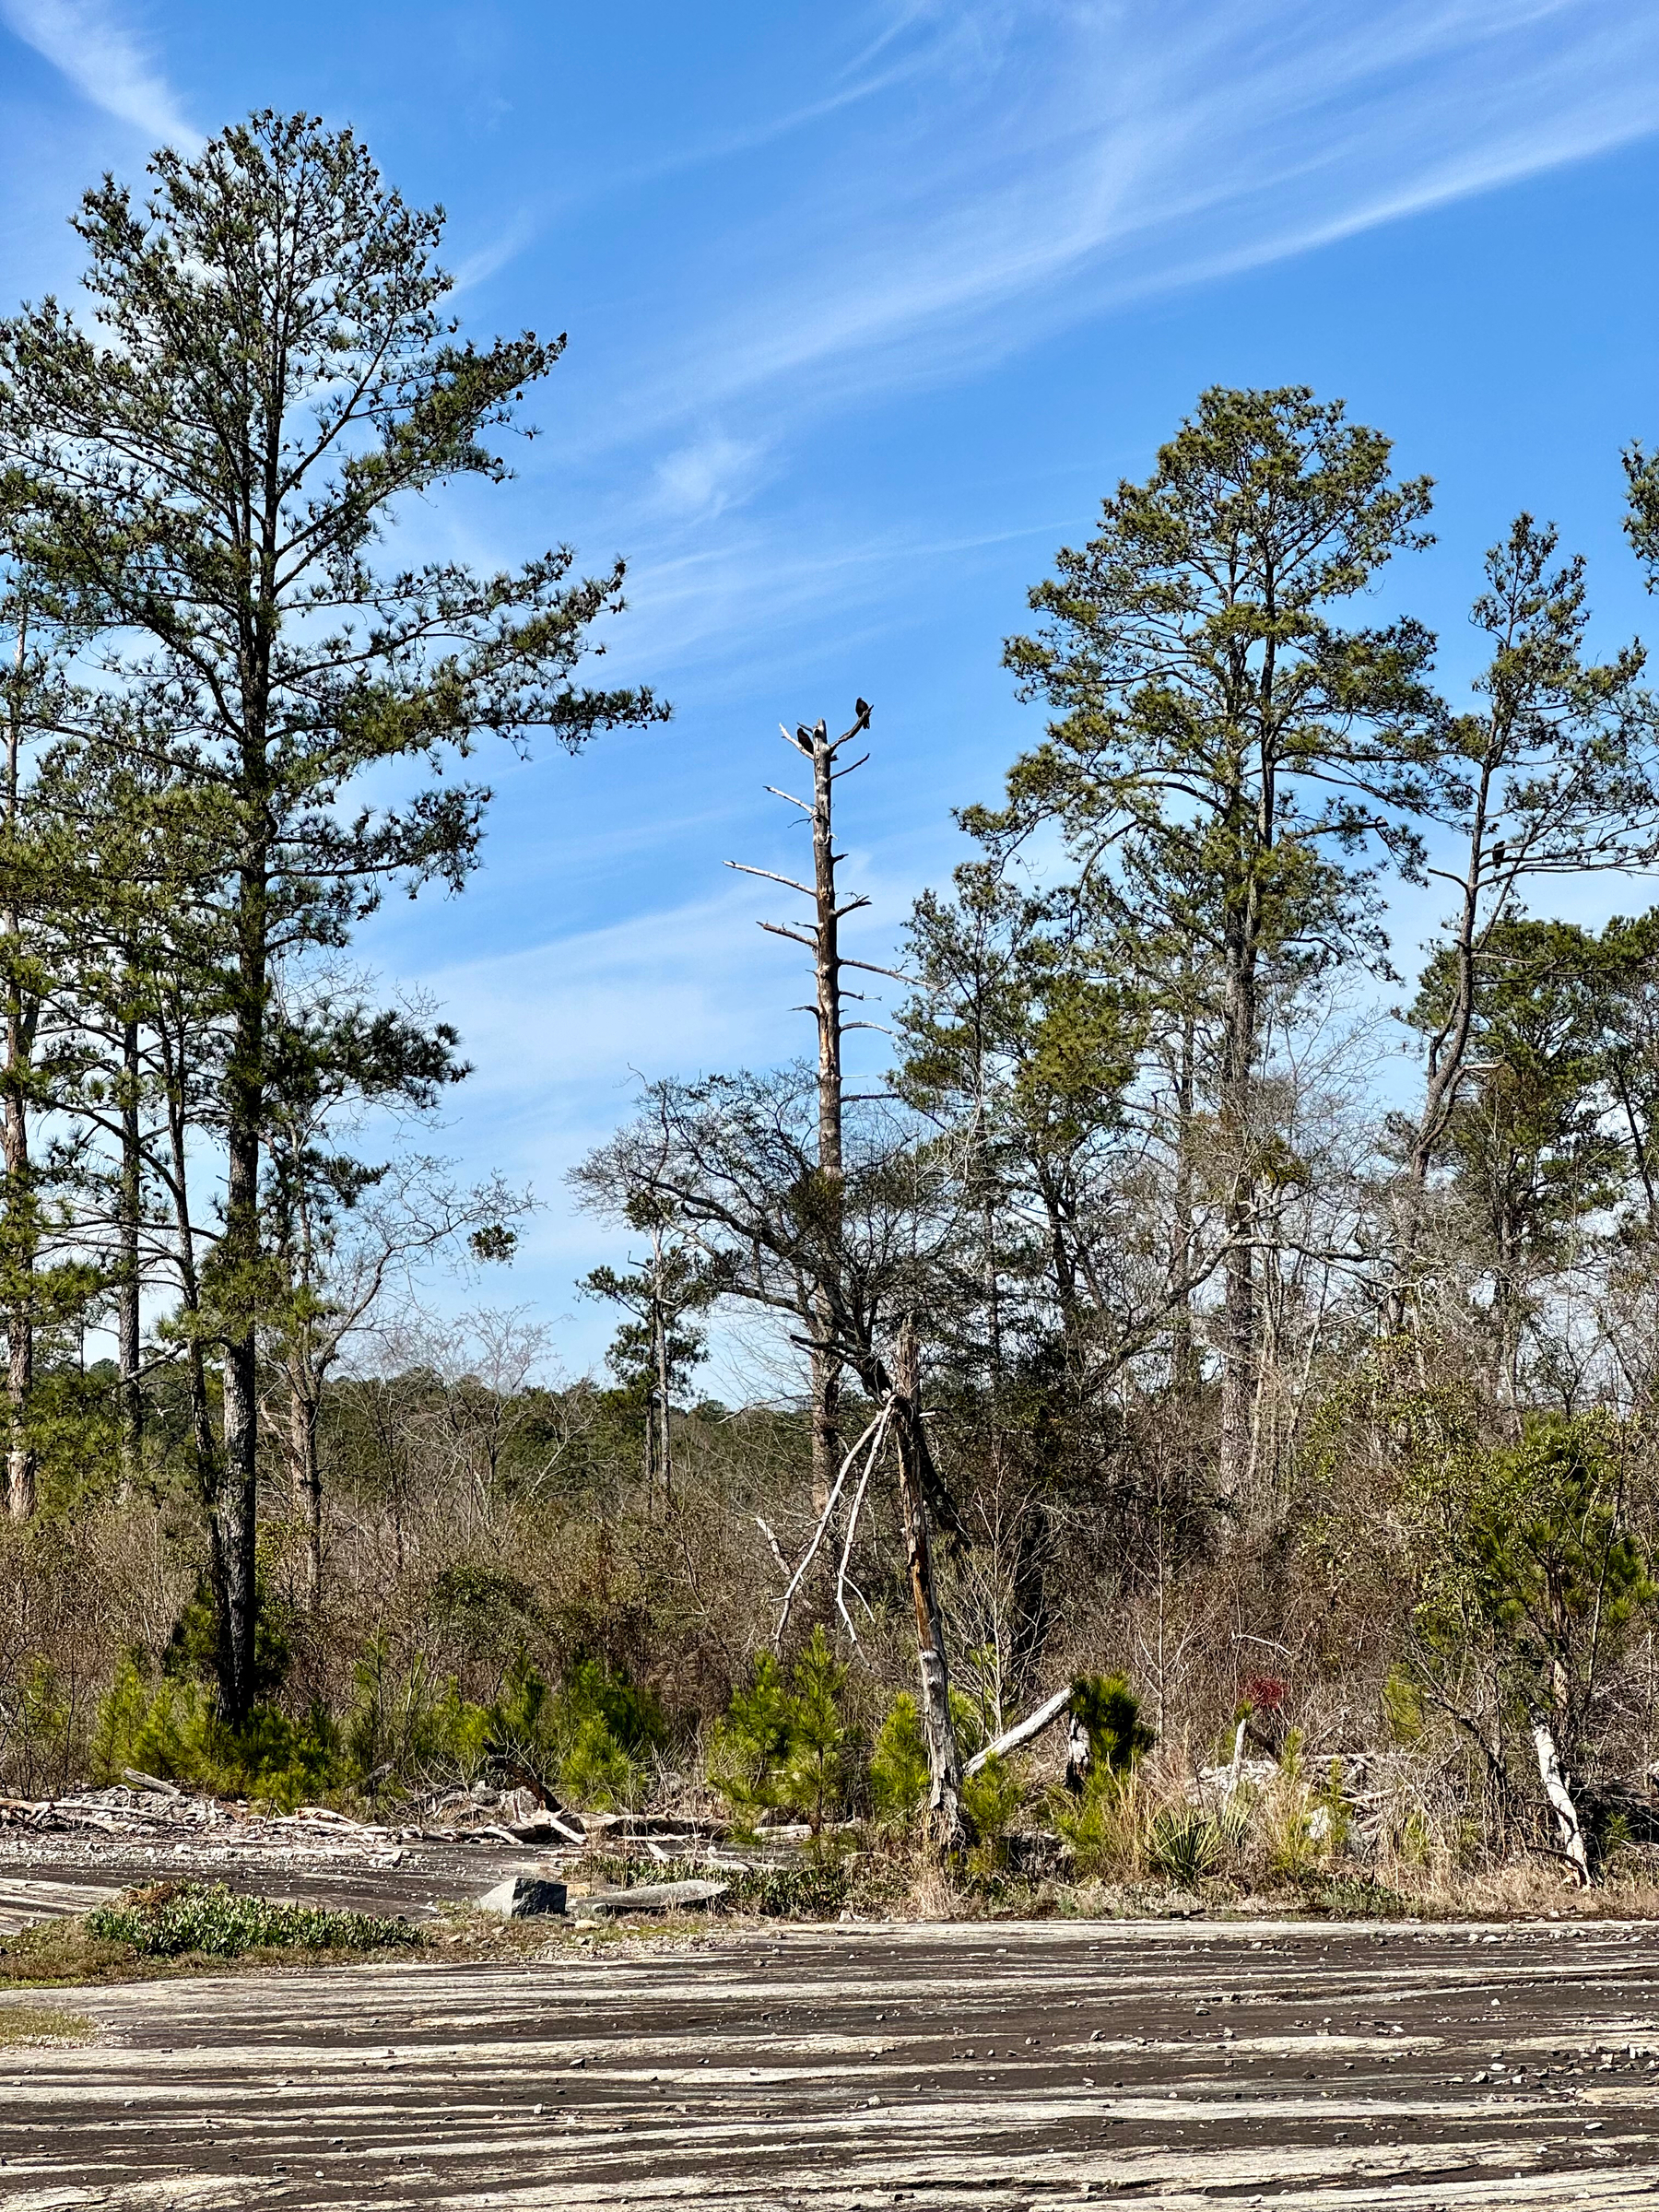 An outdoor scene with tall pine trees under a blue sky with wispy clouds. A barren tree trunk stands in the center, with a bird perched on top. The foreground shows a patch of barren land with fallen branches and stumps.